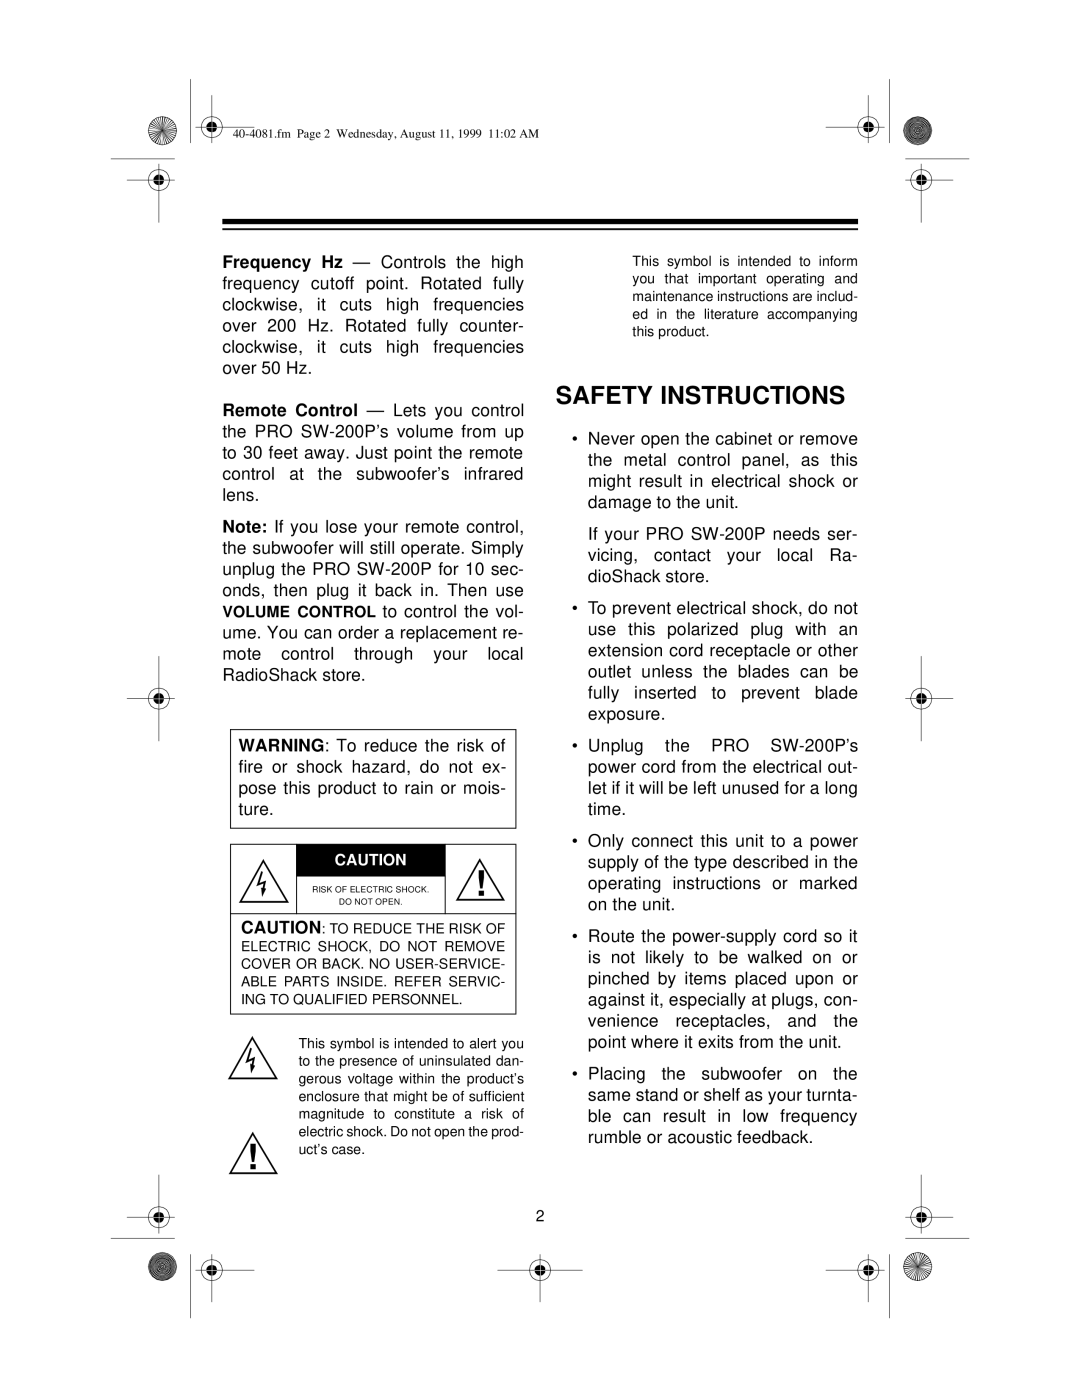 Optimus PRO SW-200P manual Safety Instructions 